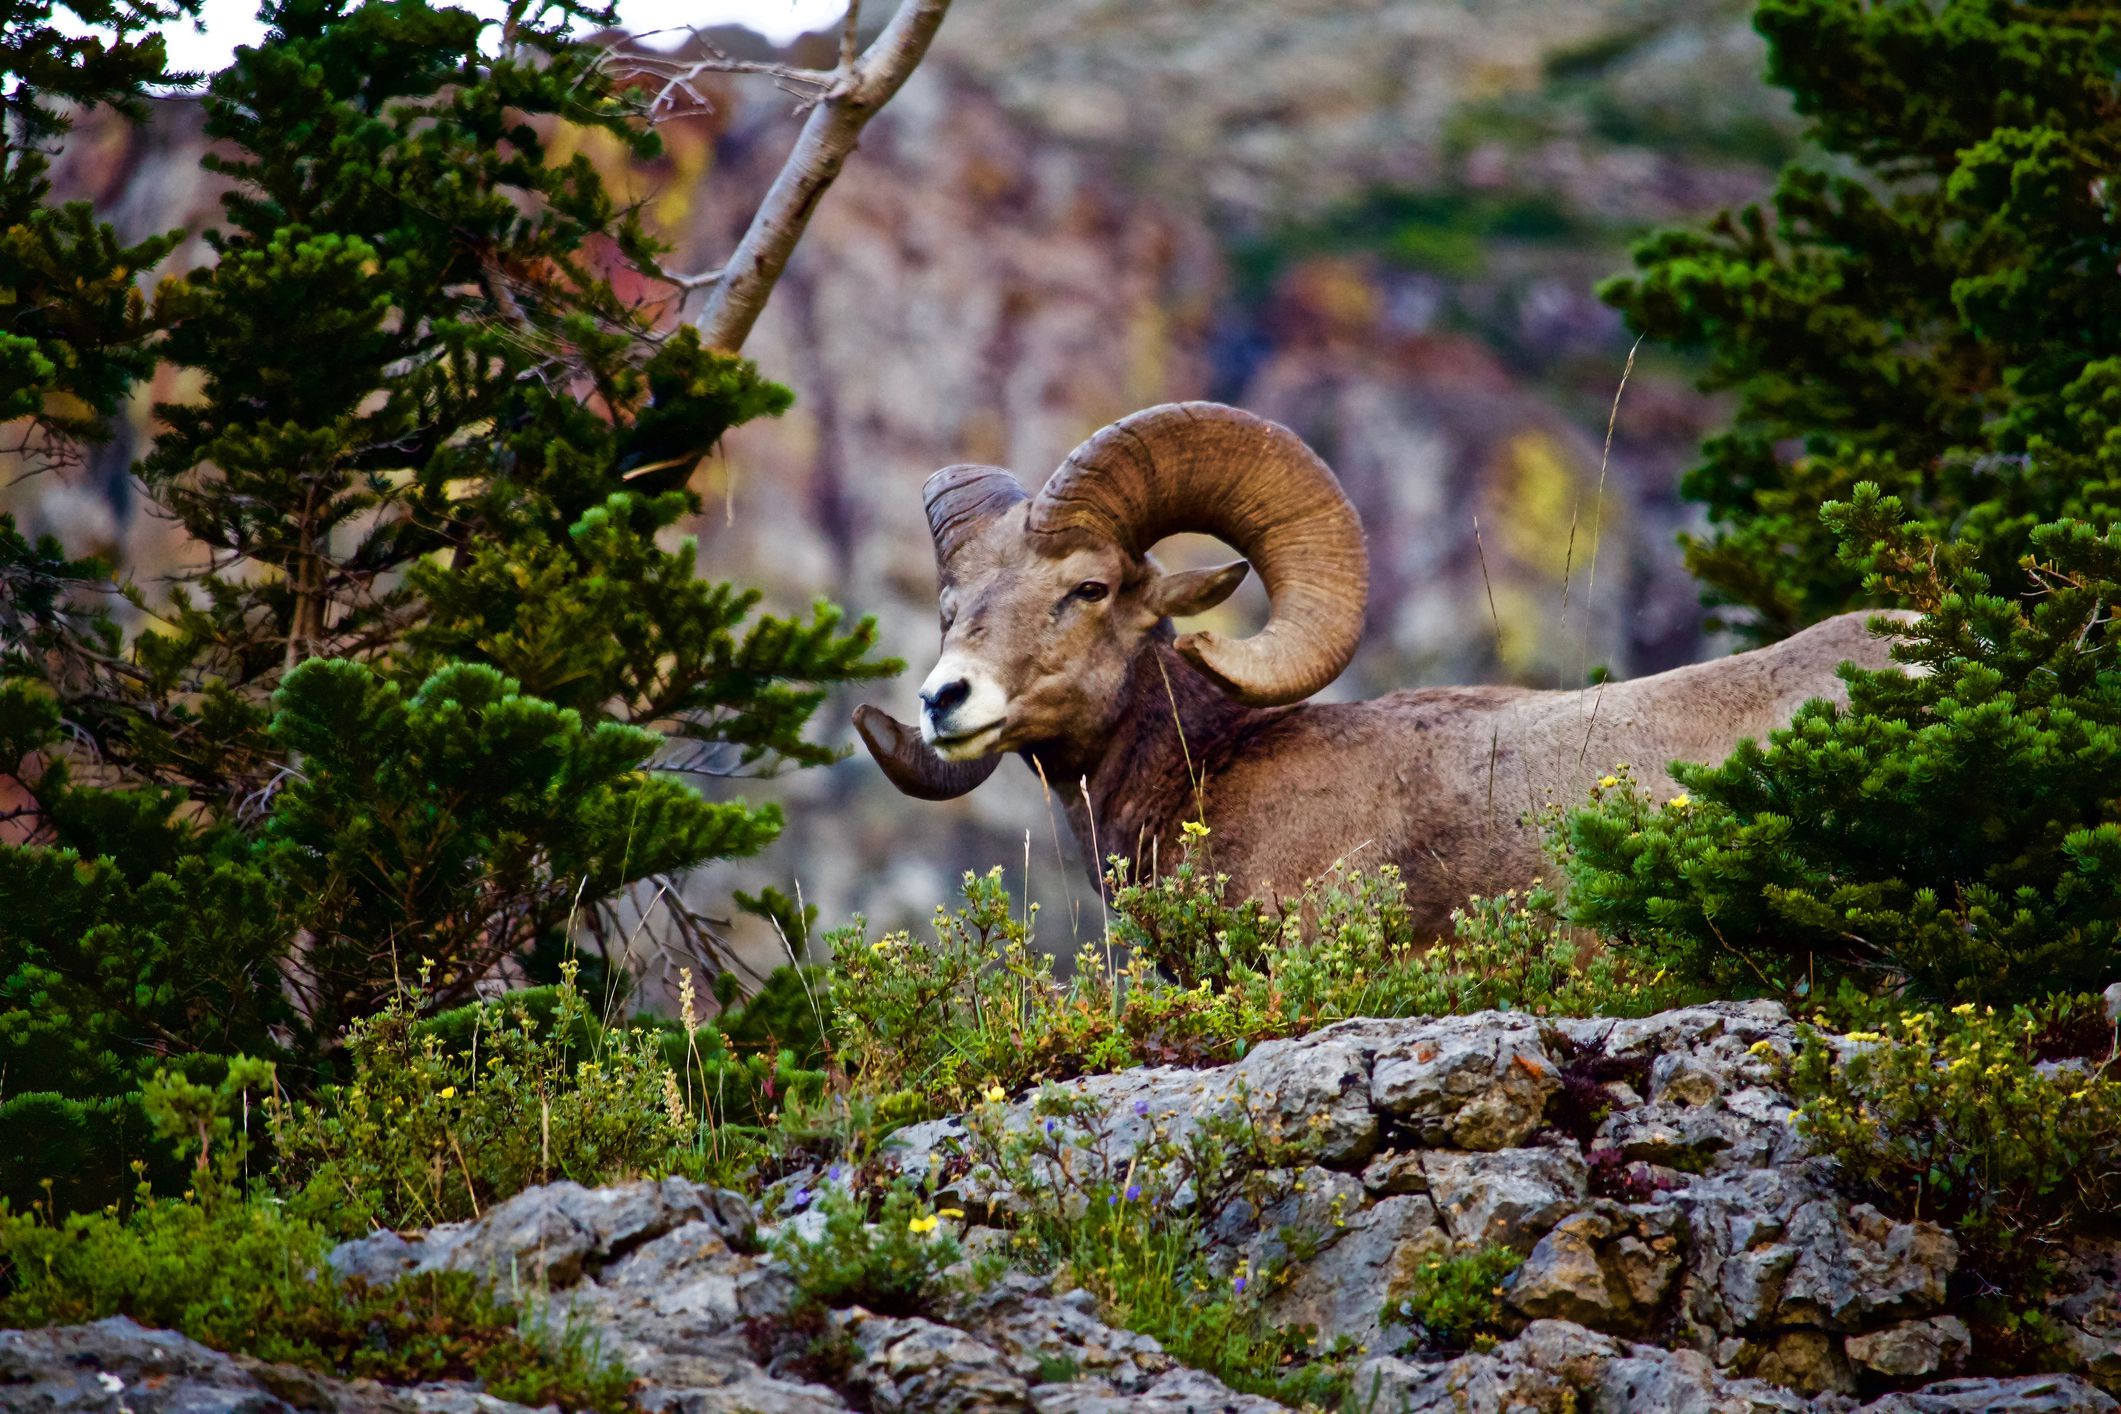 Slide 21 of 41: You can find many Rocky Mountain Bighorn Ram in the park's forests.